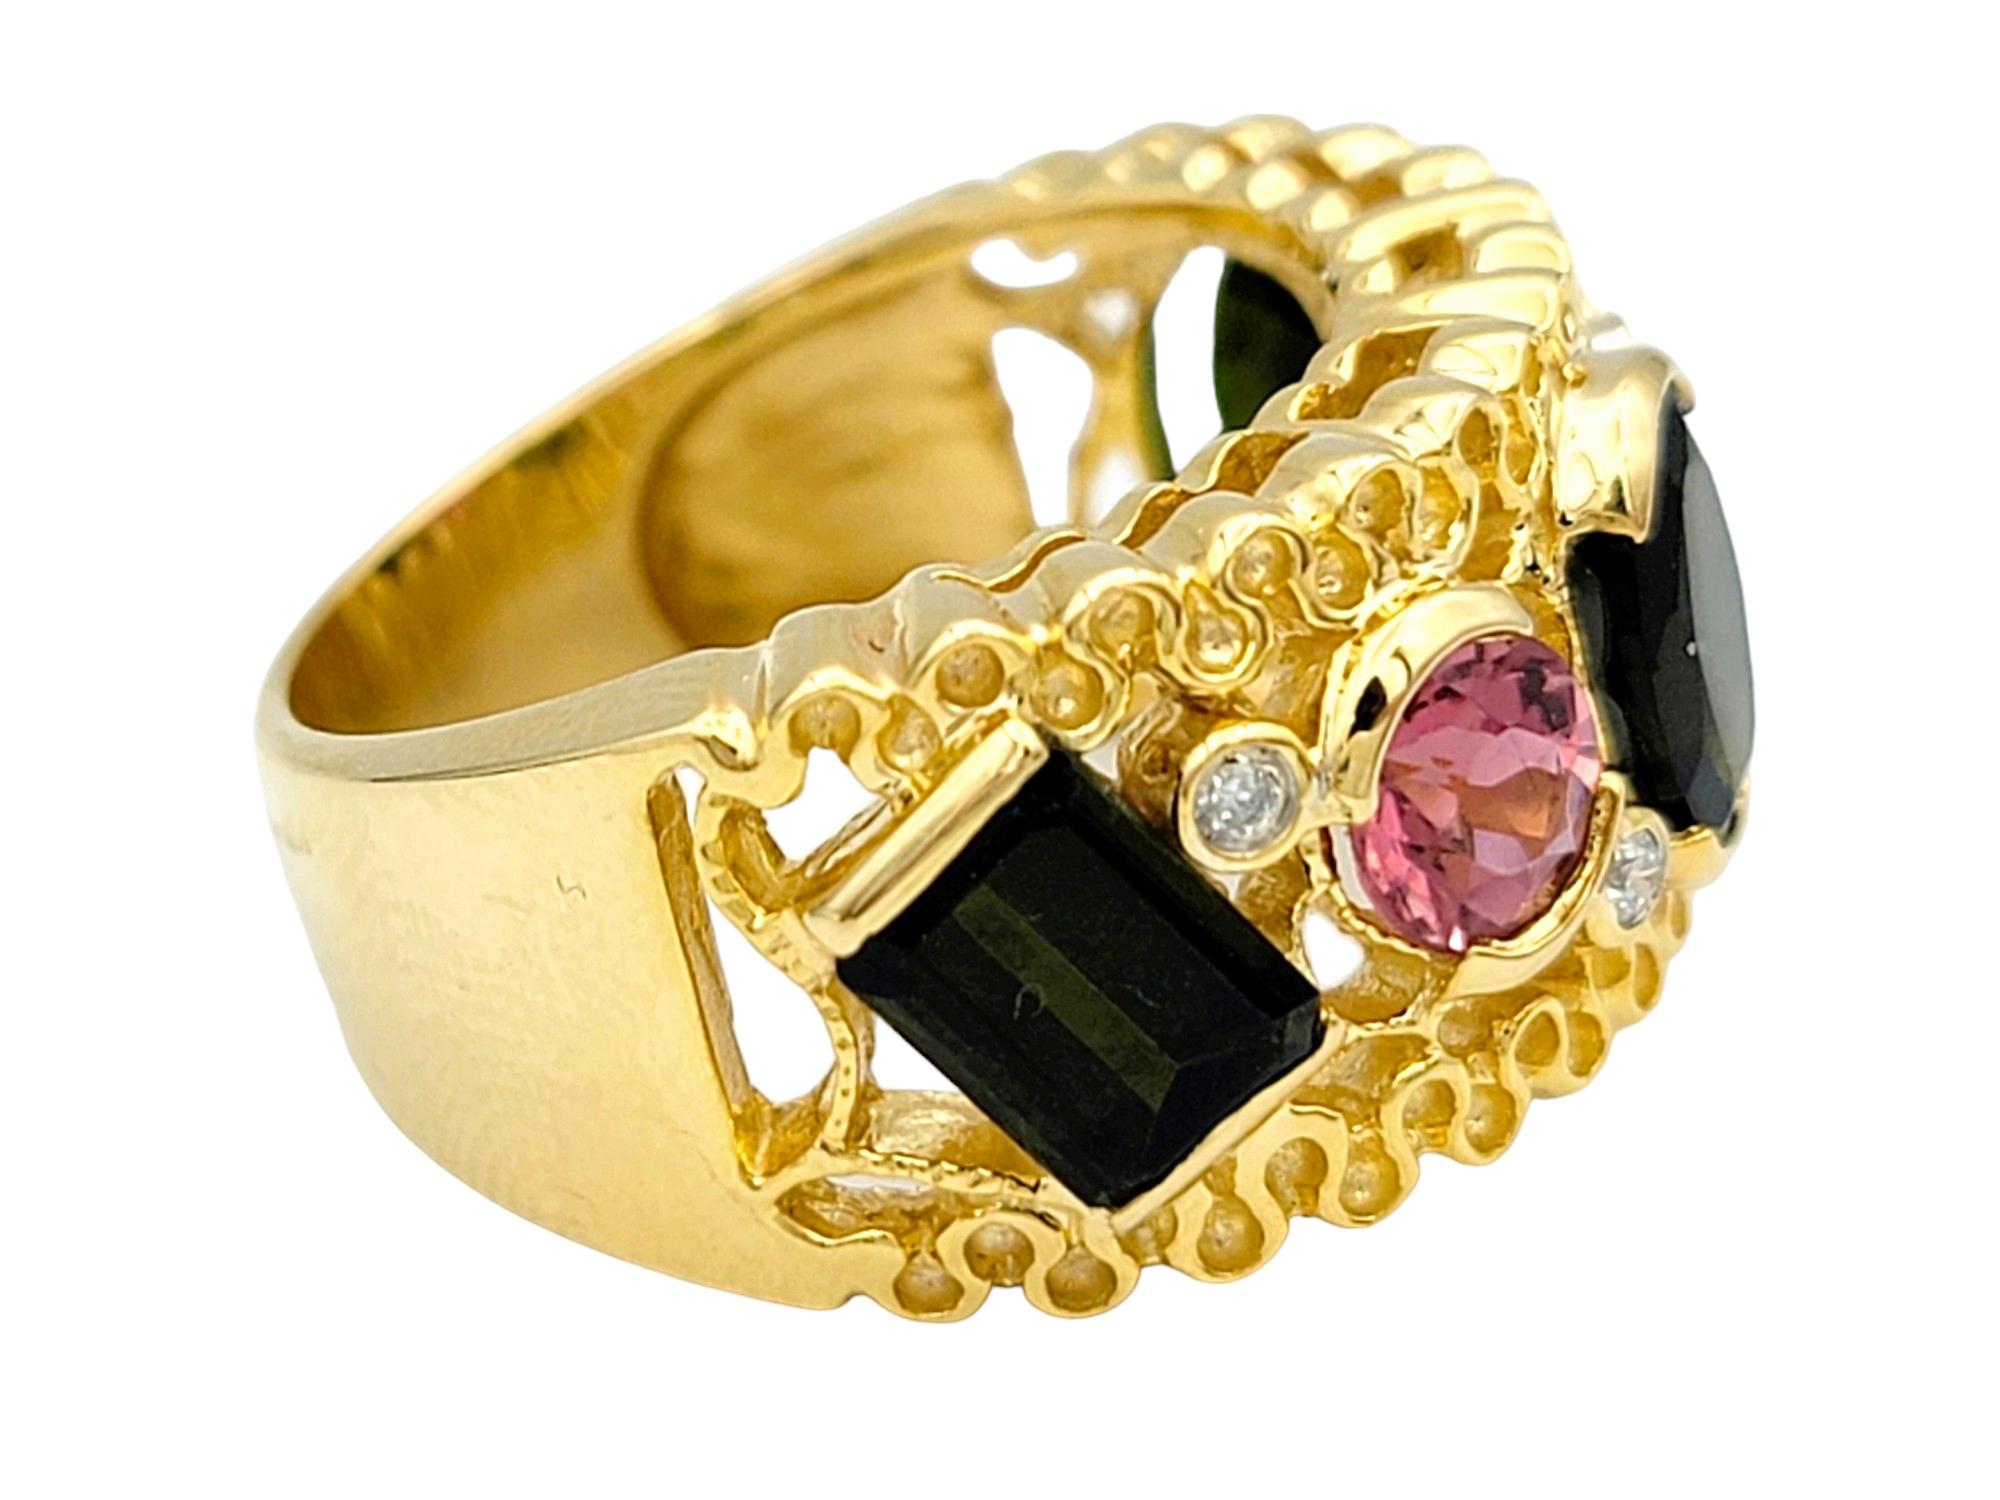 Oval Cut Multi-Cut Pink and Green Tourmaline Wide Band Ring Set in 14 Karat Yellow Gold For Sale